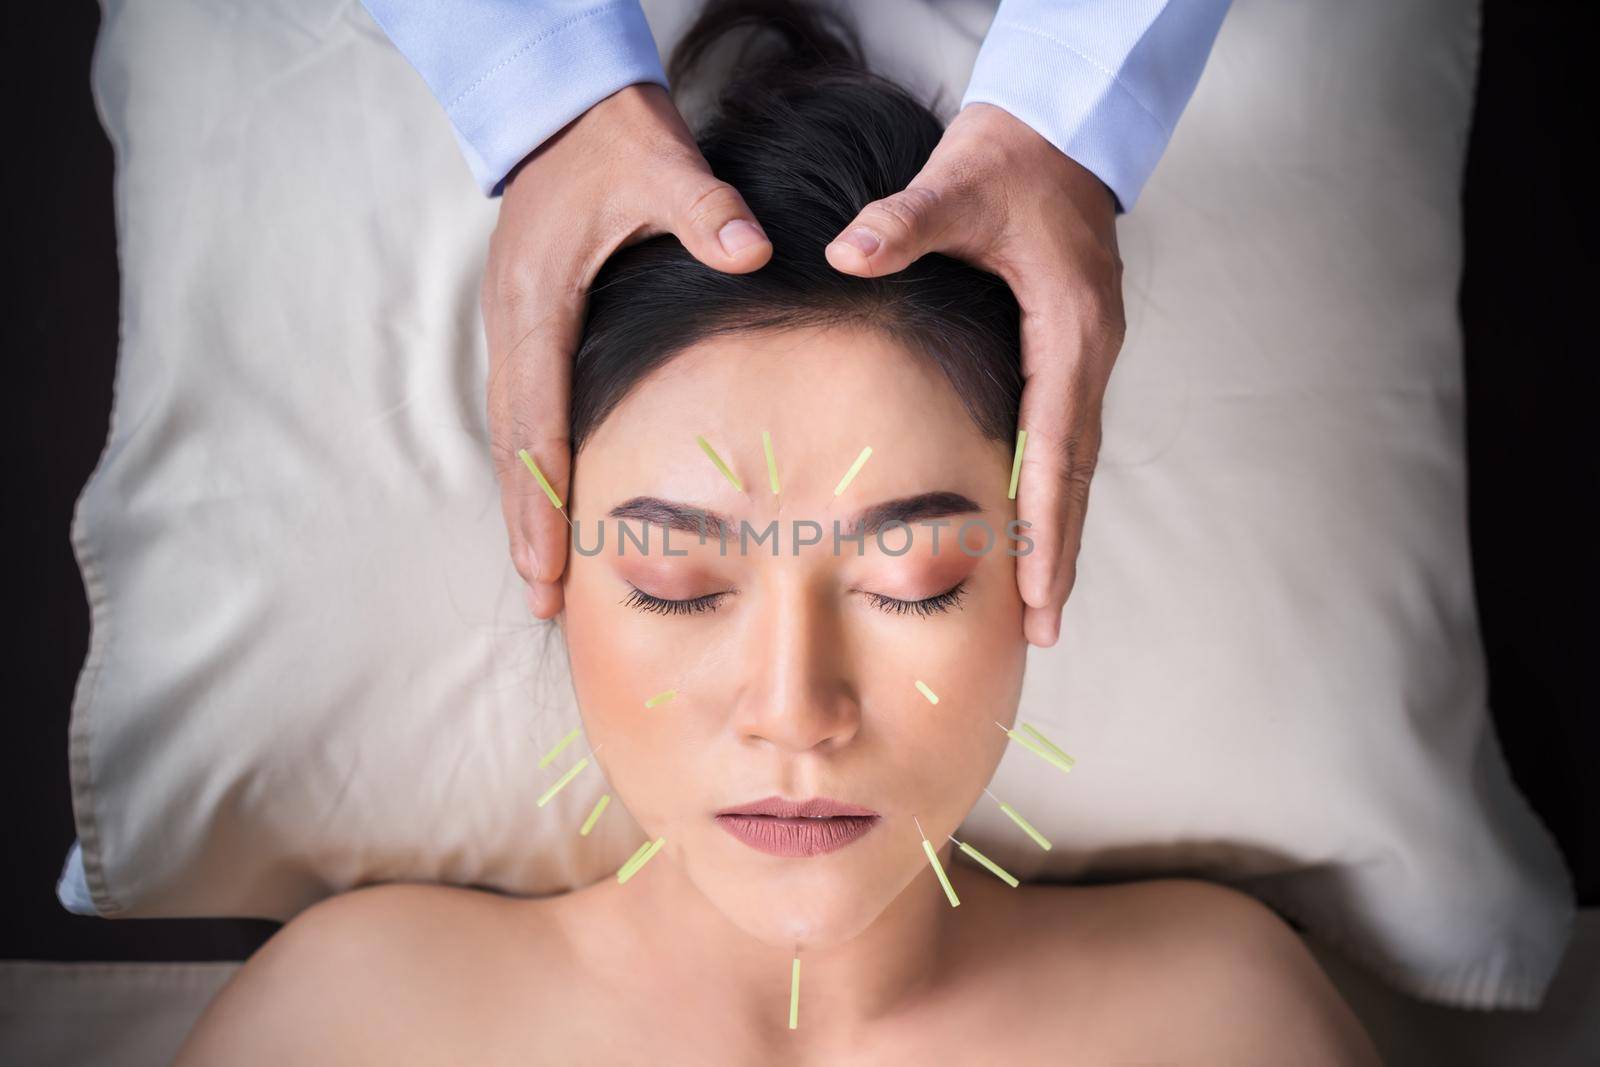 young woman undergoing acupuncture treatment on face